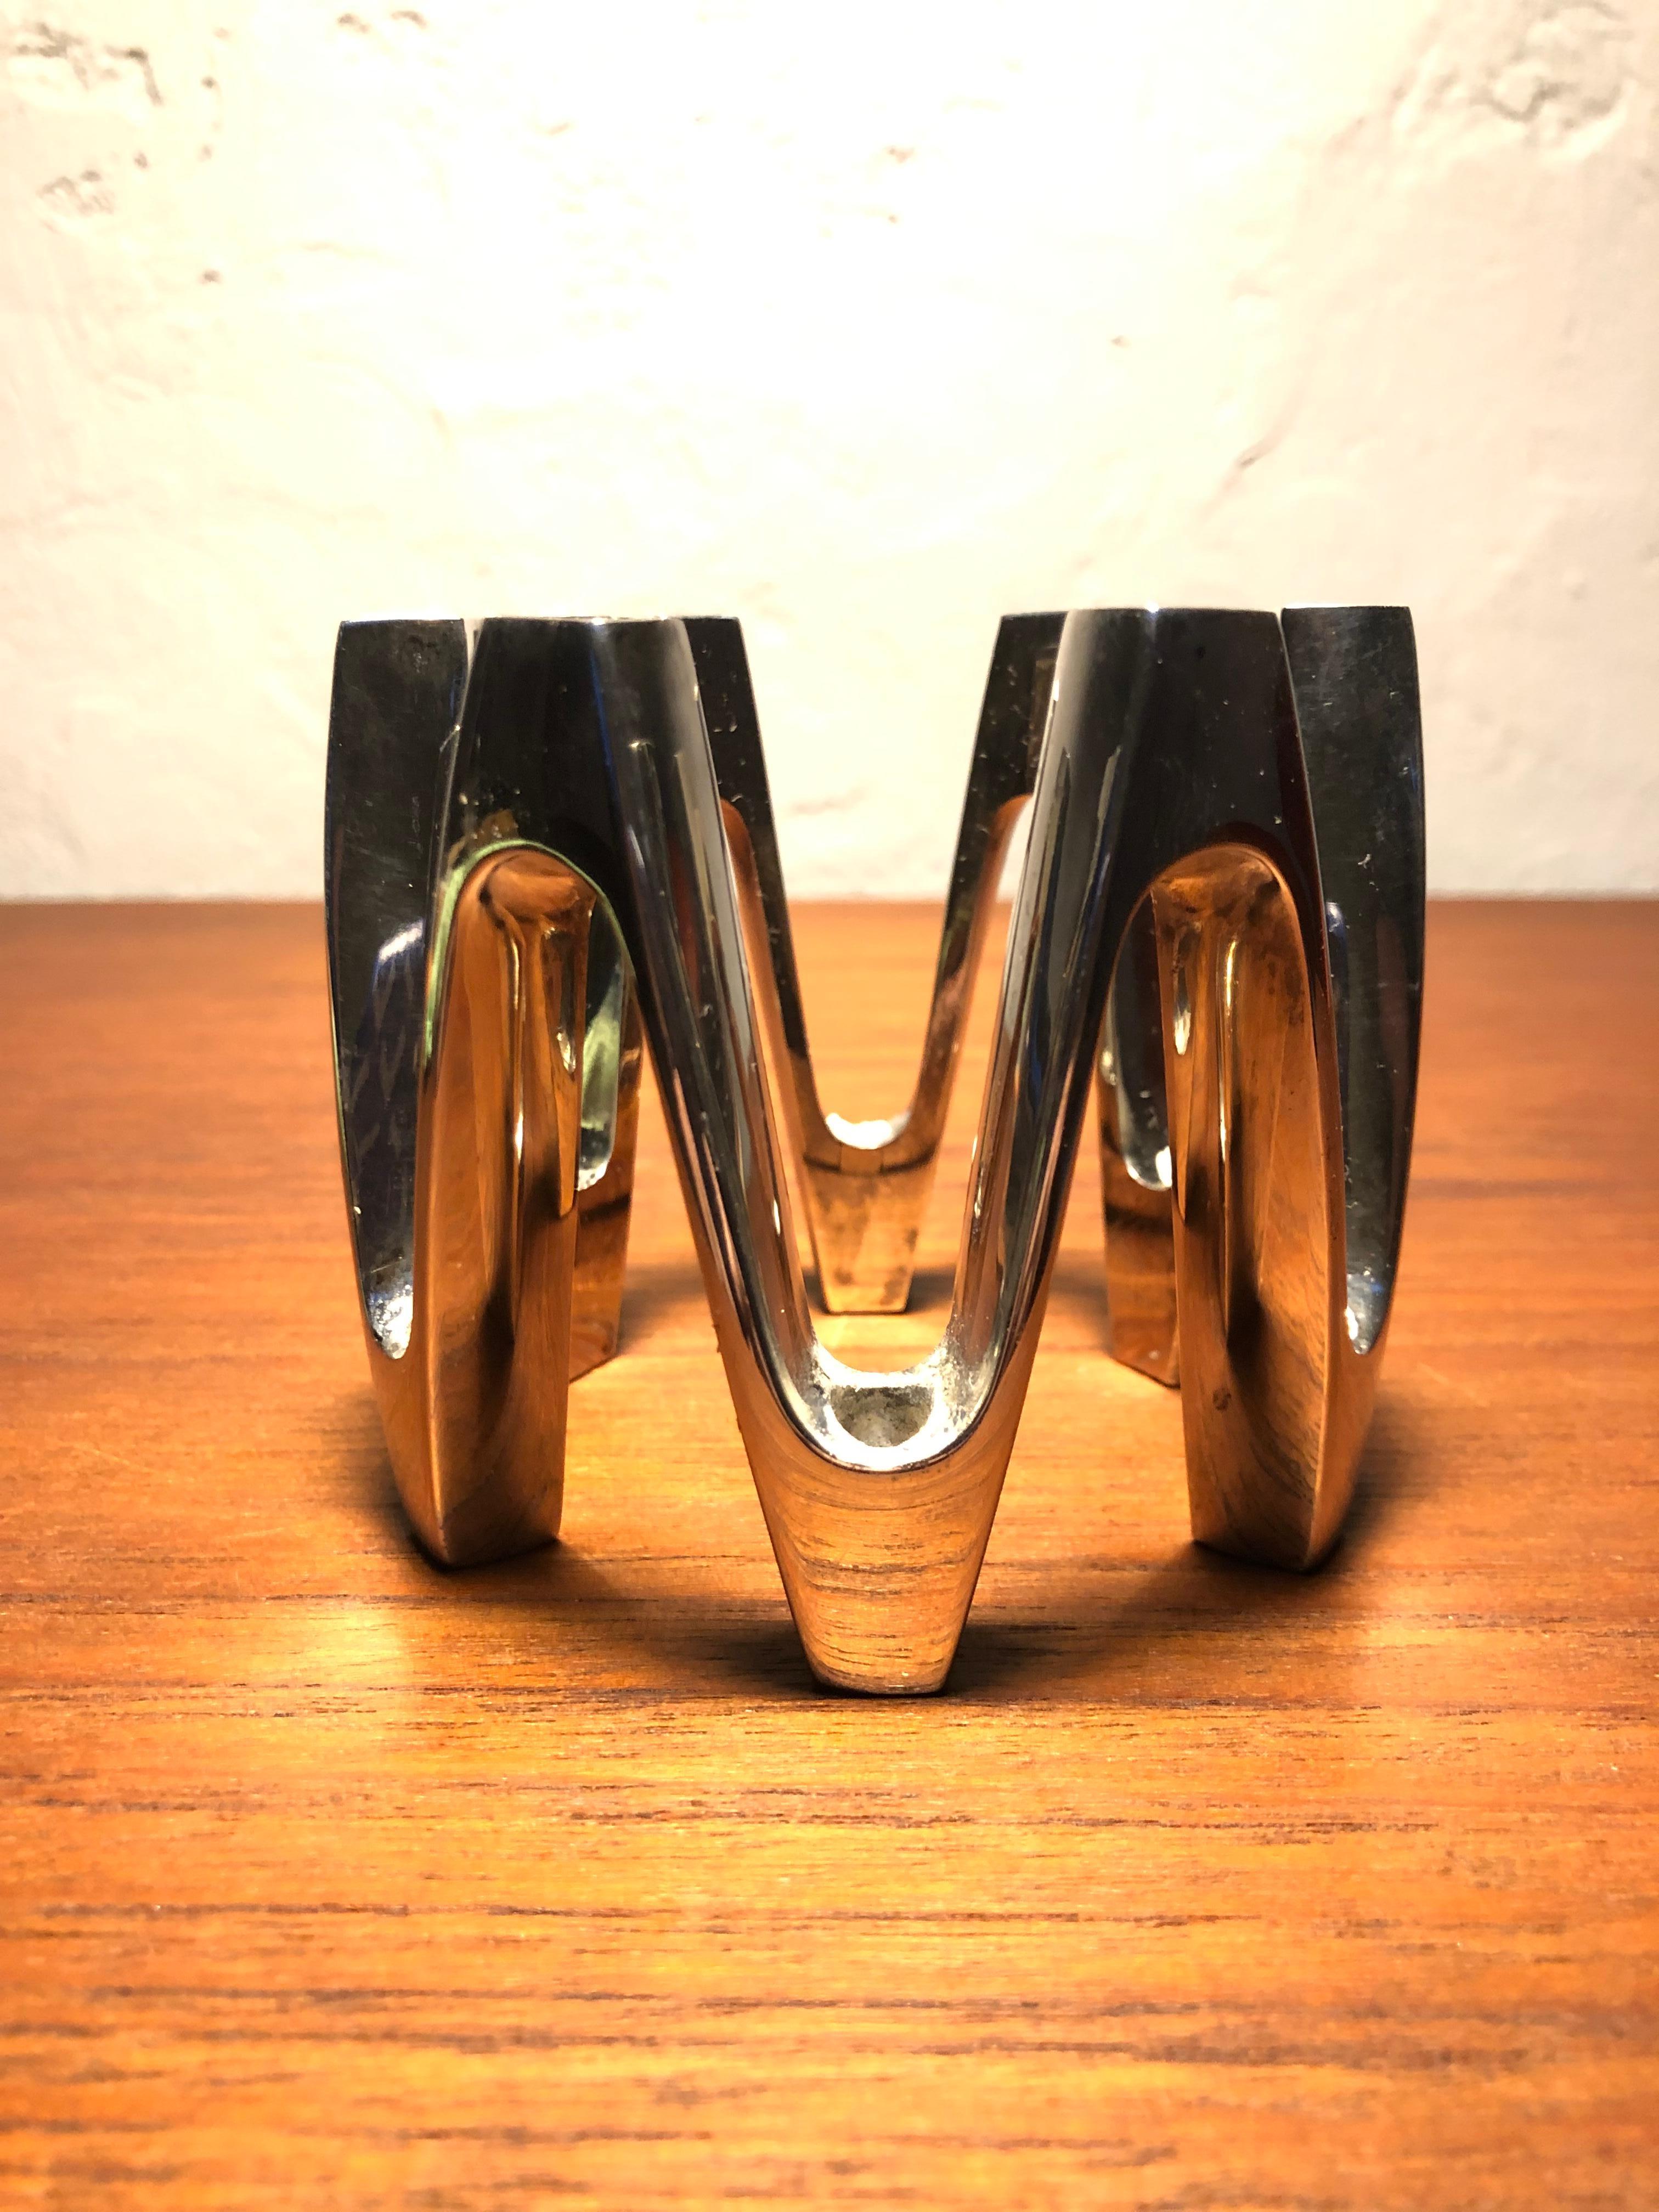 A beautiful vintage Danish chrome 12 candleholder designed by Jens Quistgaard. 
Included are 2 boxes of 12 original vintage taper candles?
Quistgaard lthough a sculptor and rooted in traditional craftsmanship, he made an early international career